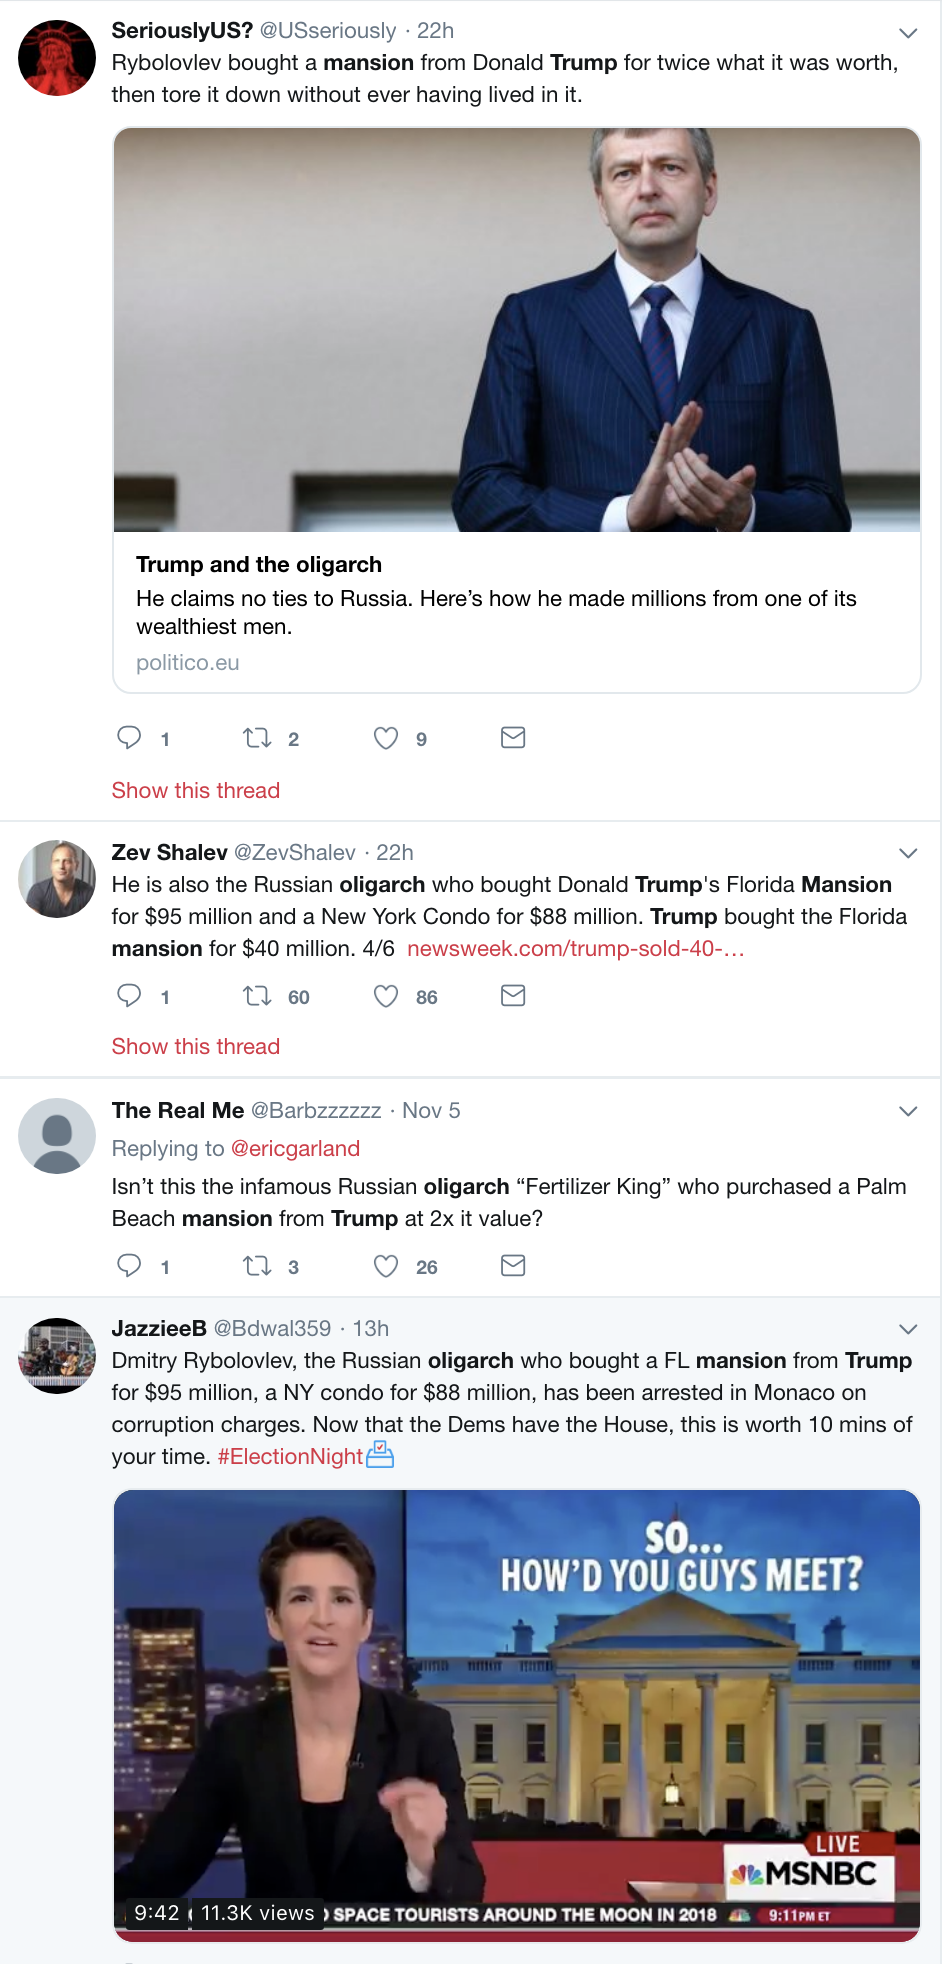 Screen-Shot-2018-11-07-at-11.24.15-AM Russian Oligarch Dimitry Rybolovlev Has Placed Under Arrest (DETAILS) Corruption Crime Donald Trump Politics Russia Top Stories 